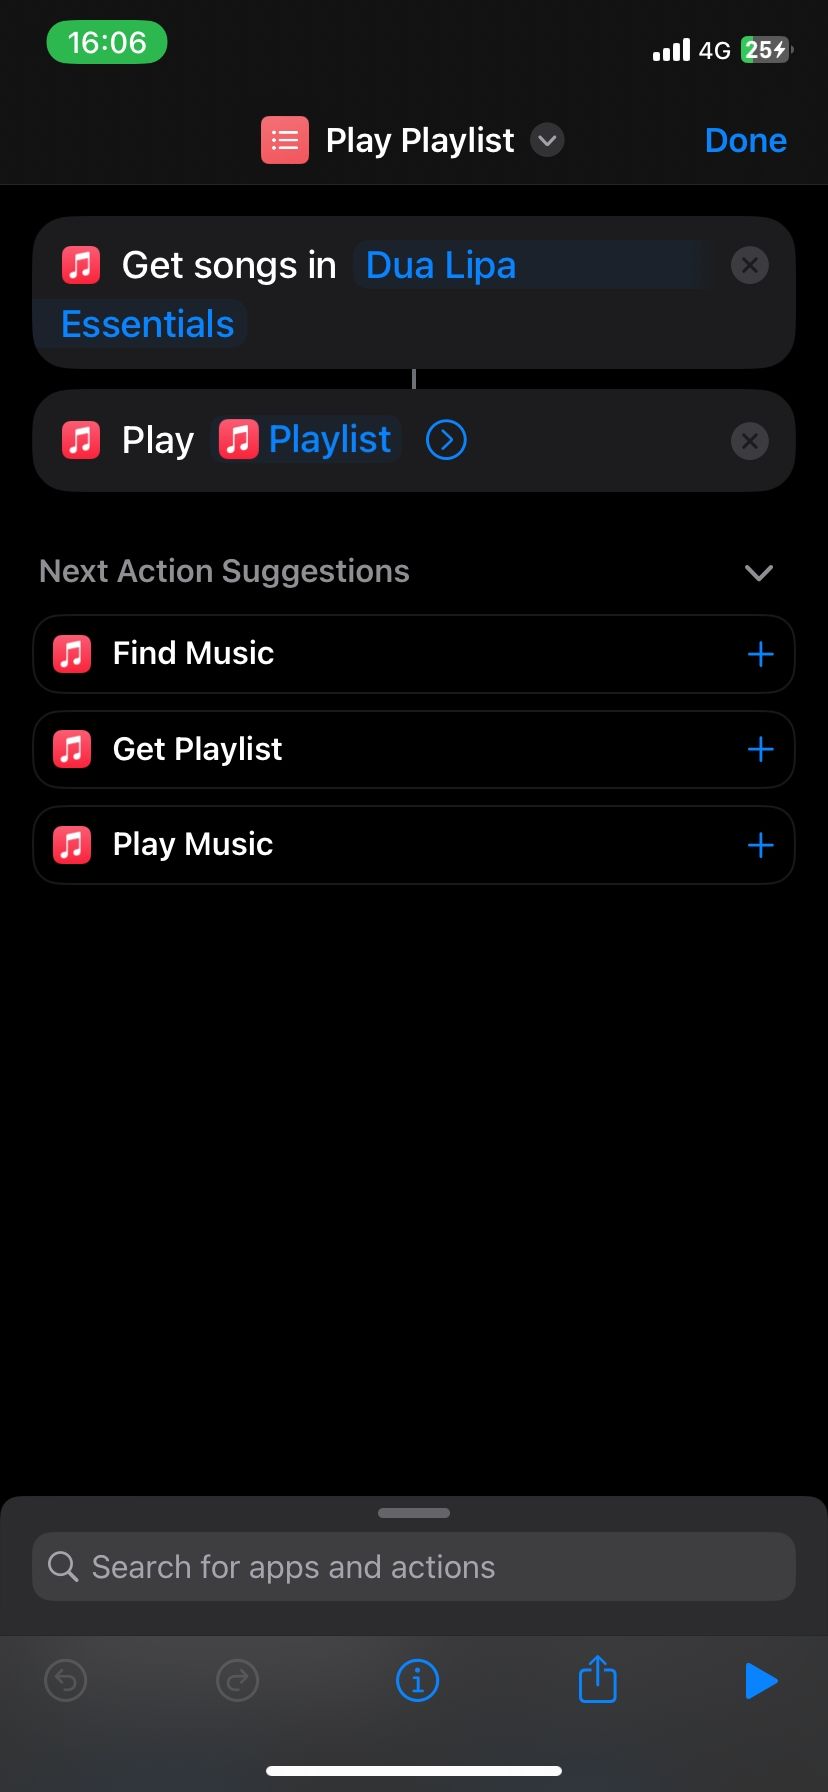 Play Playlist shortcut view on iPhone